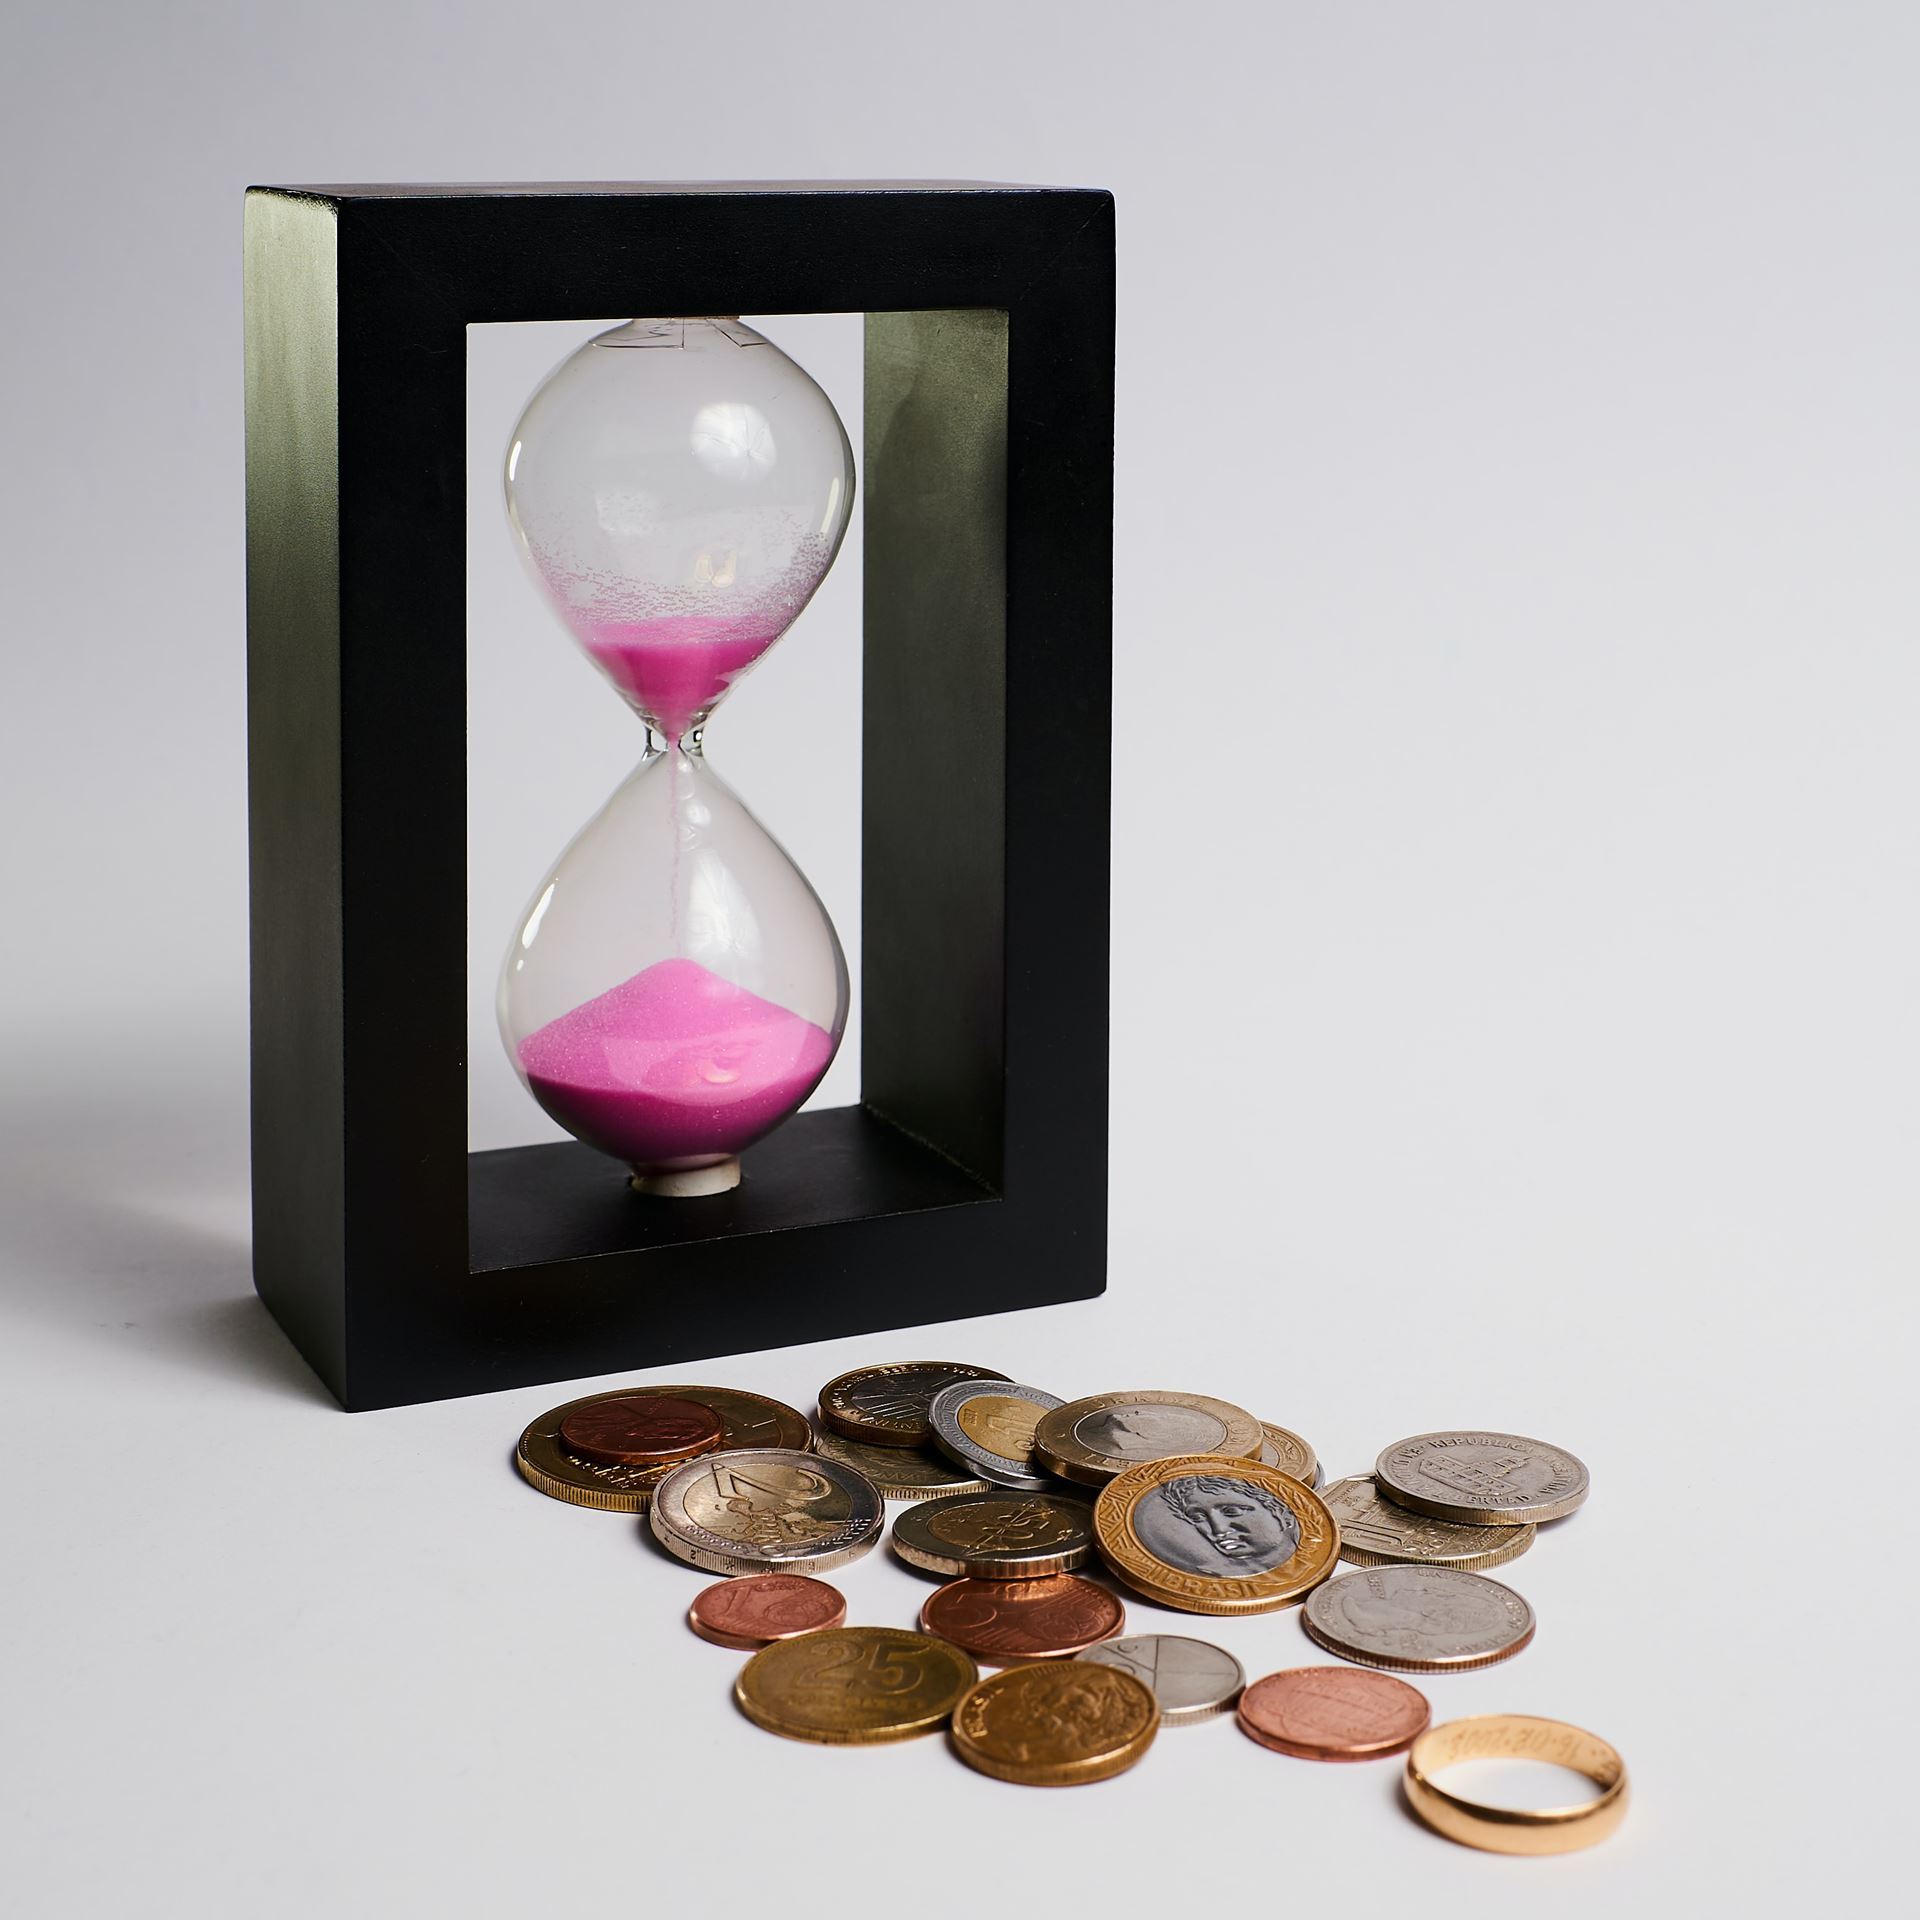 An hourglass with pink sand in it inside a thick black frame, euro coins of various denominations, and a gold ring, all against a light grey background